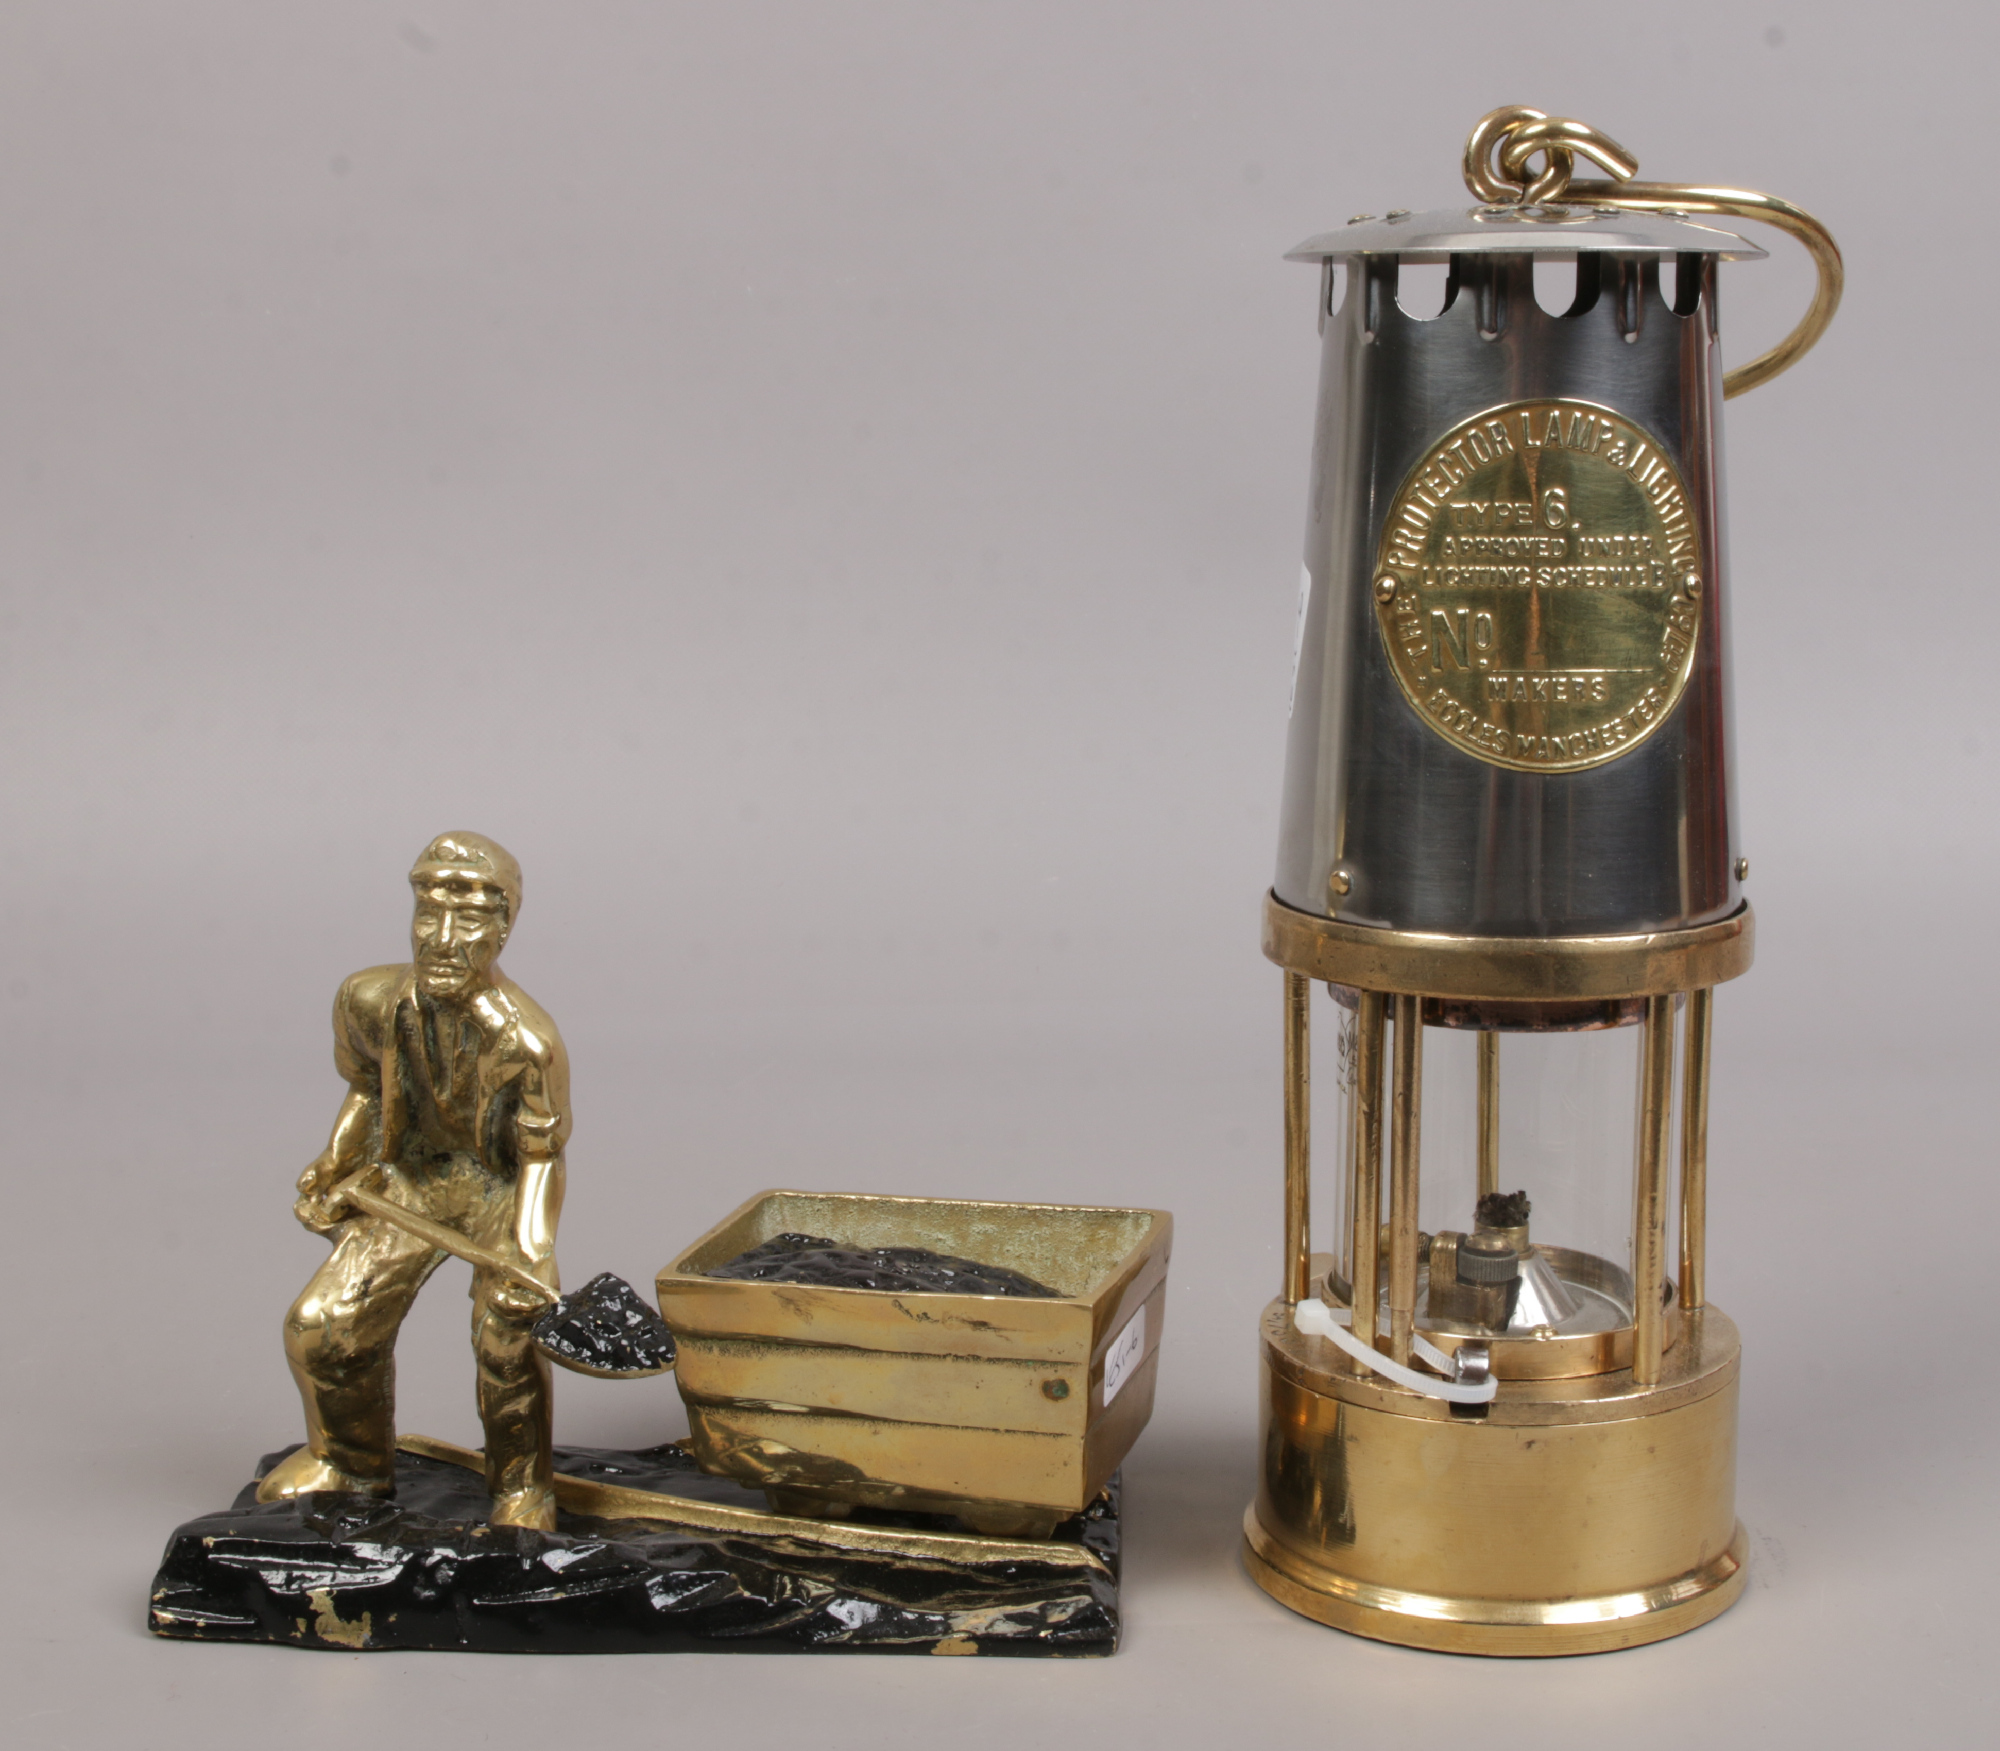 An Eccles type 6 brass and chrome miners re-lightable protector lamp along with a brass figure of